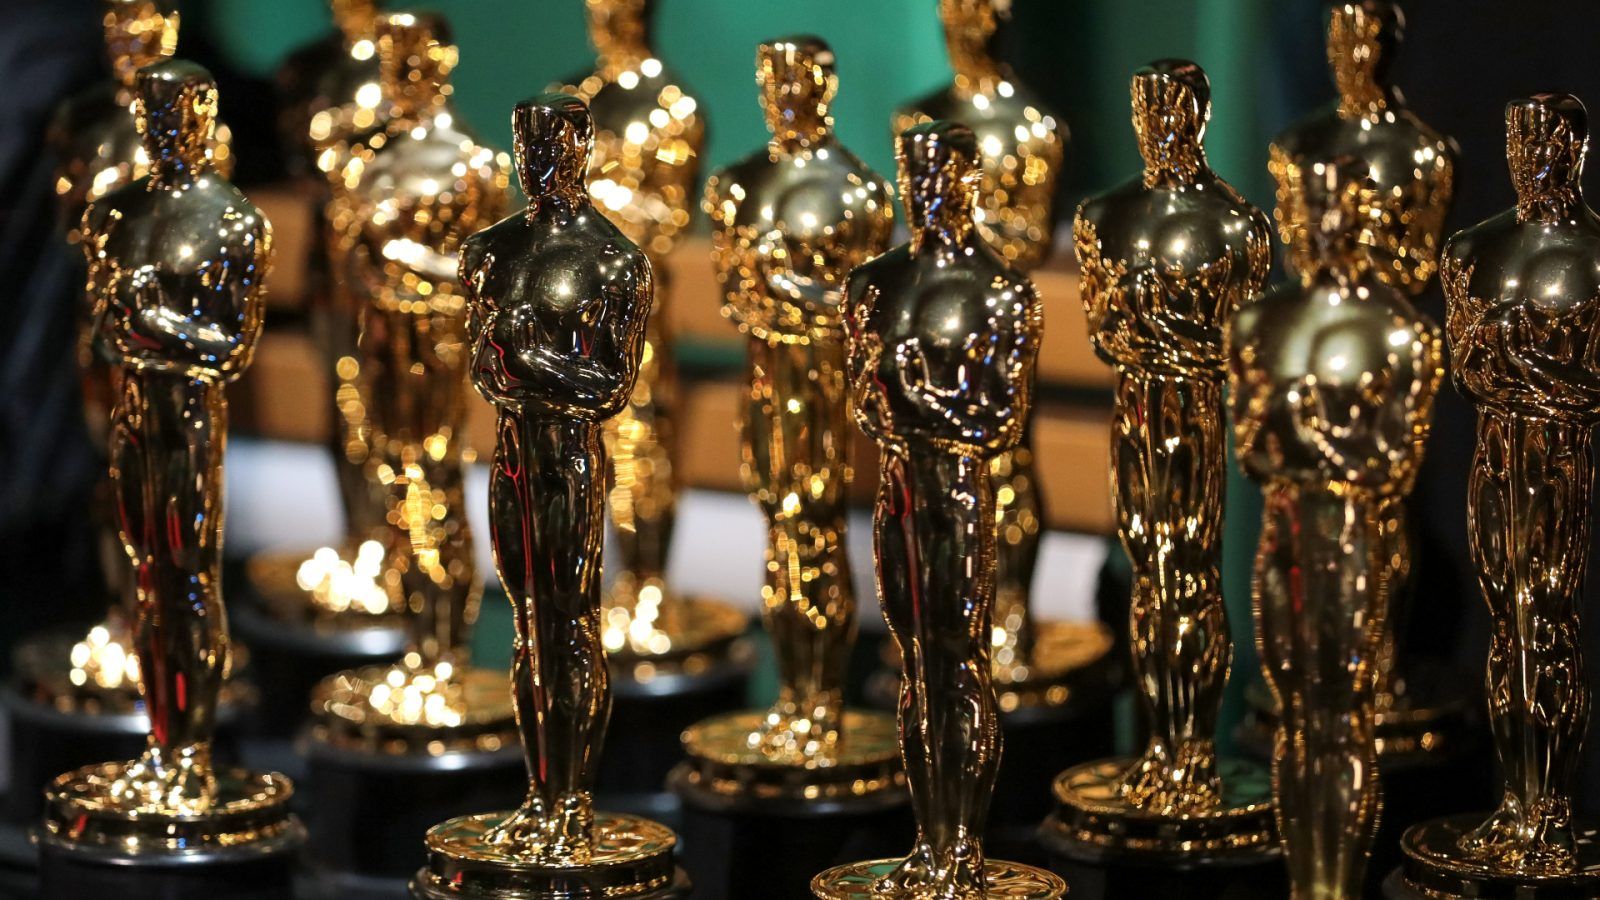 7 most expensive Oscar statuettes sold at an auction